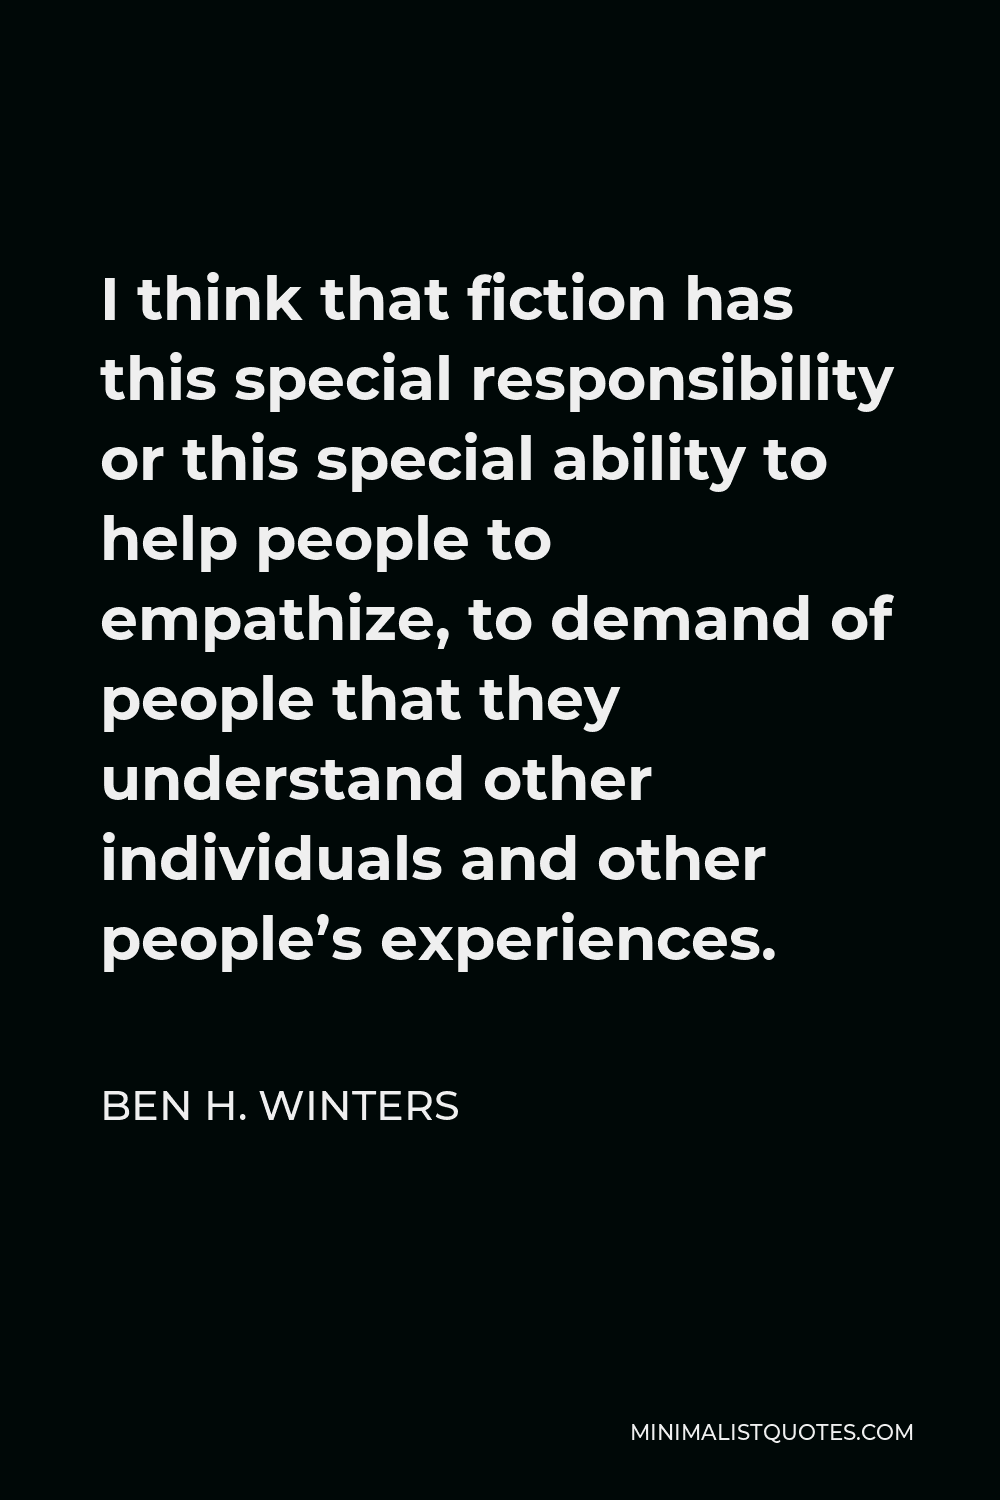 Ben H. Winters Quote - I think that fiction has this special responsibility or this special ability to help people to empathize, to demand of people that they understand other individuals and other people’s experiences.